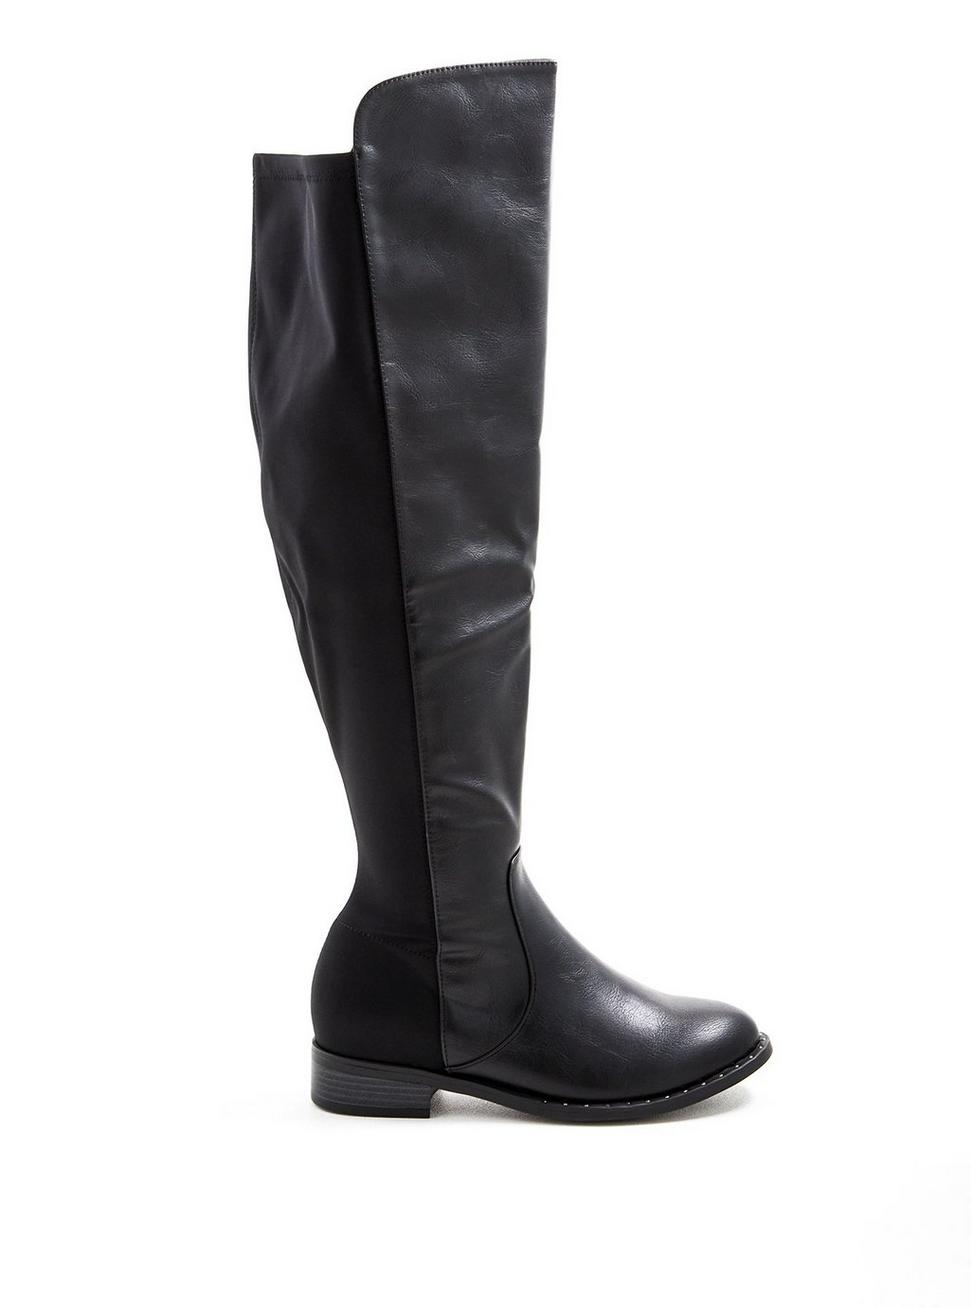 Plus Size Black Faux Leather Studded Welt Over The Knee Boot (WW), BLACK, hi-res